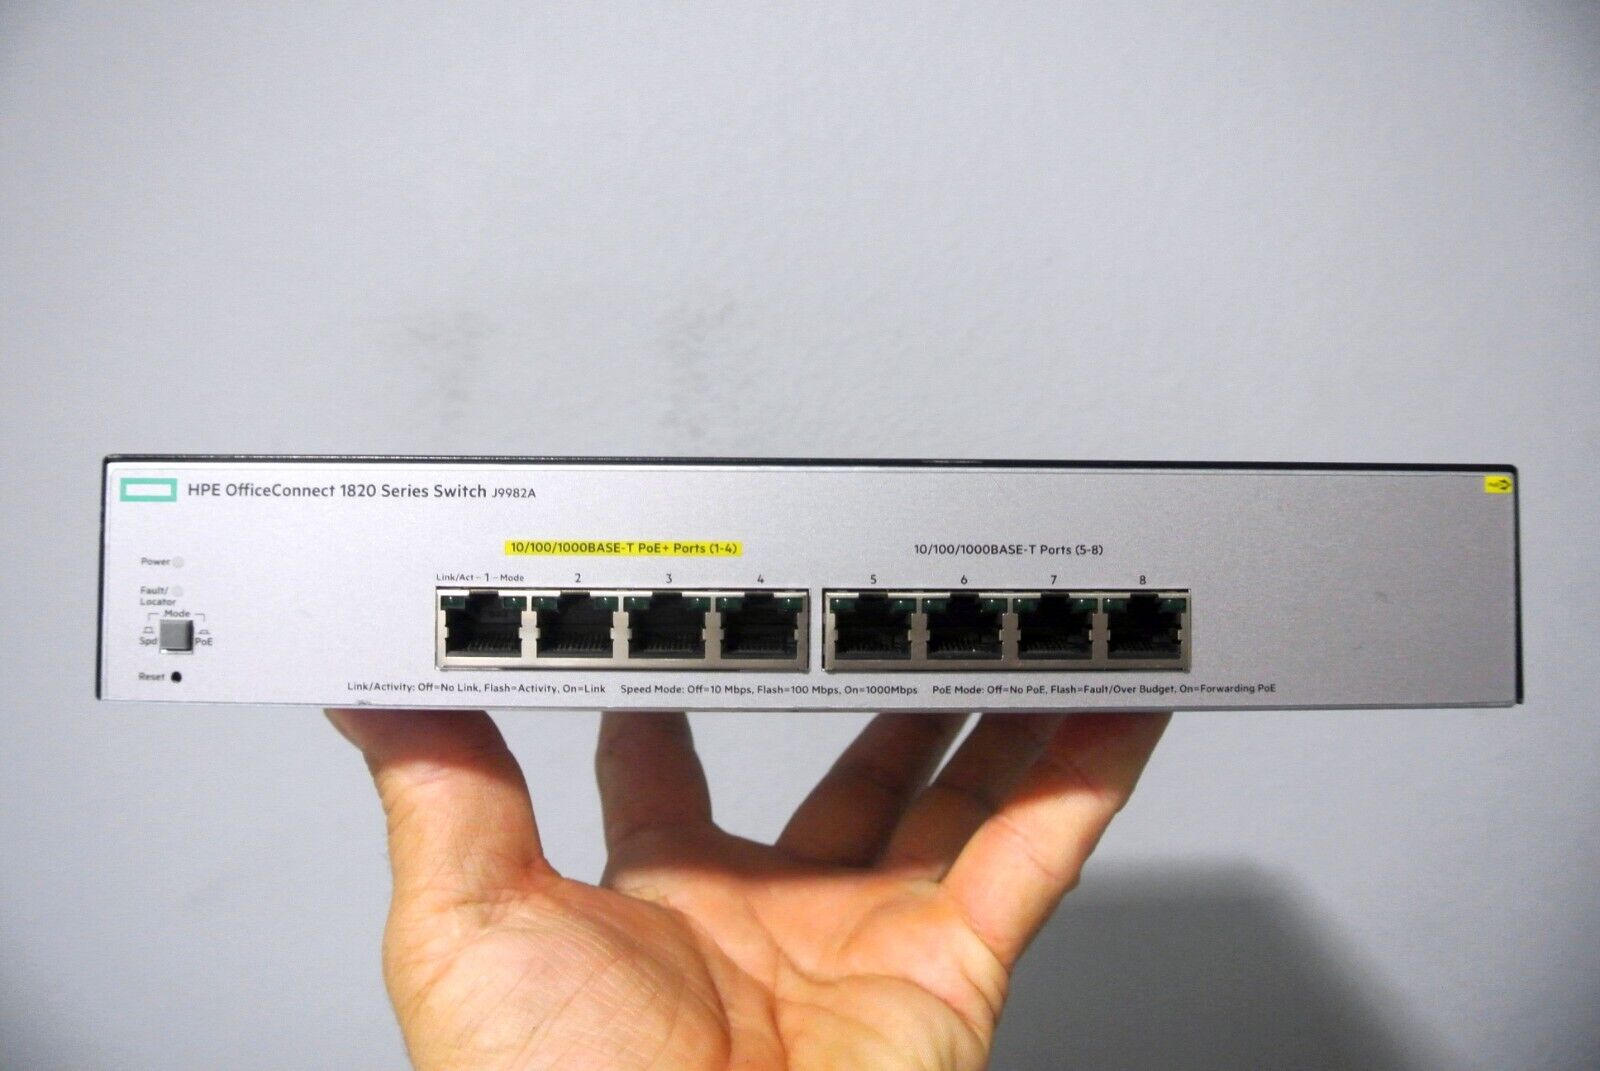 HPE 1820 8 PORT GIGABIT 4 PORTS POE+ J9982A MANAGED SWITCH ONLY